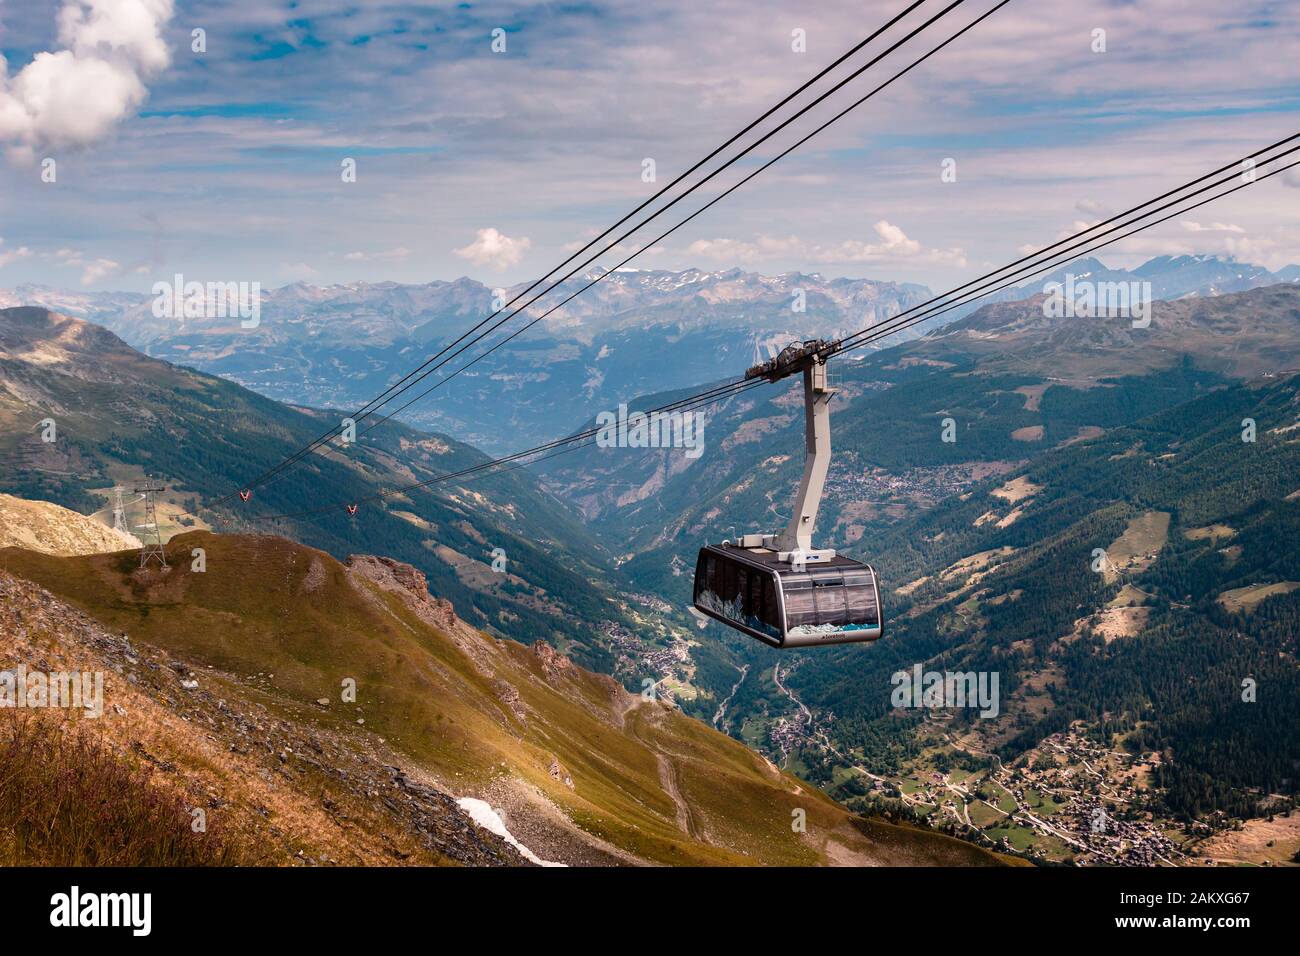 Sorebois, Anniviers, Valais, Switzerland - AUGUST 7 2018 : Cable car arriving on the Sorebois coming from Grimentz down in the valley on a cloudy summ Stock Photo